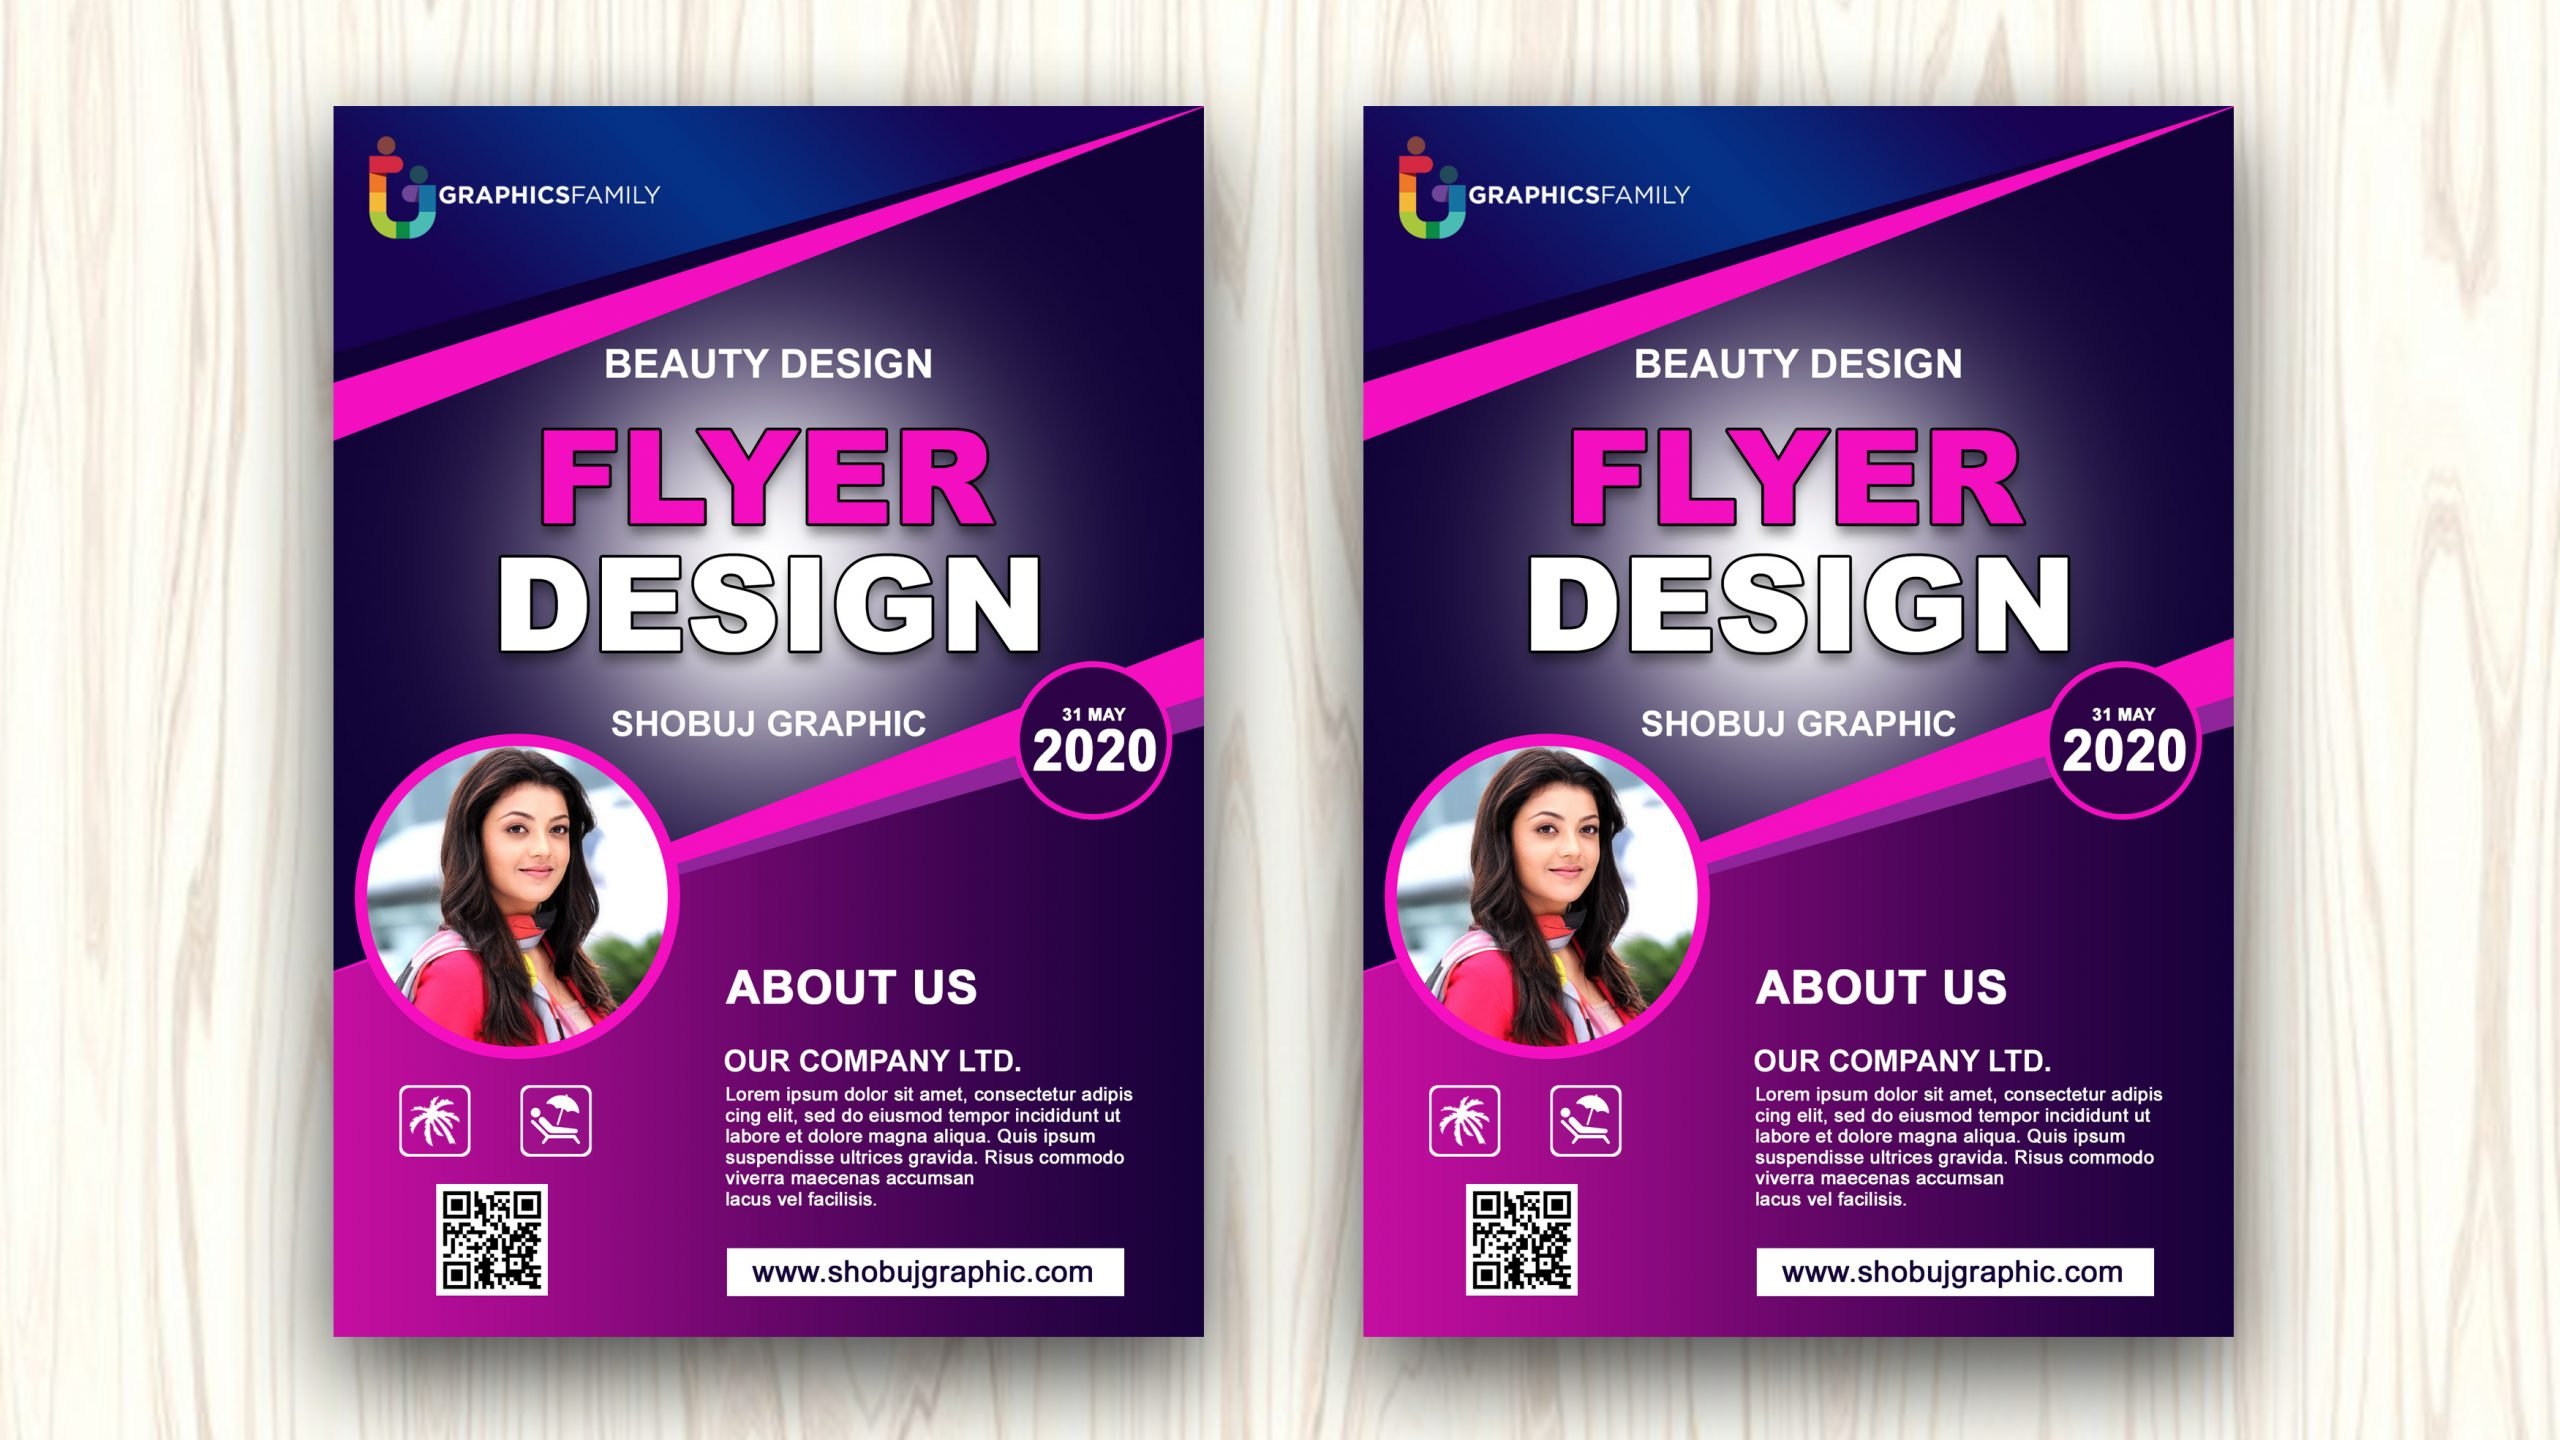 Creative Beauty Flyer Design PSD Download - GraphicsFamily